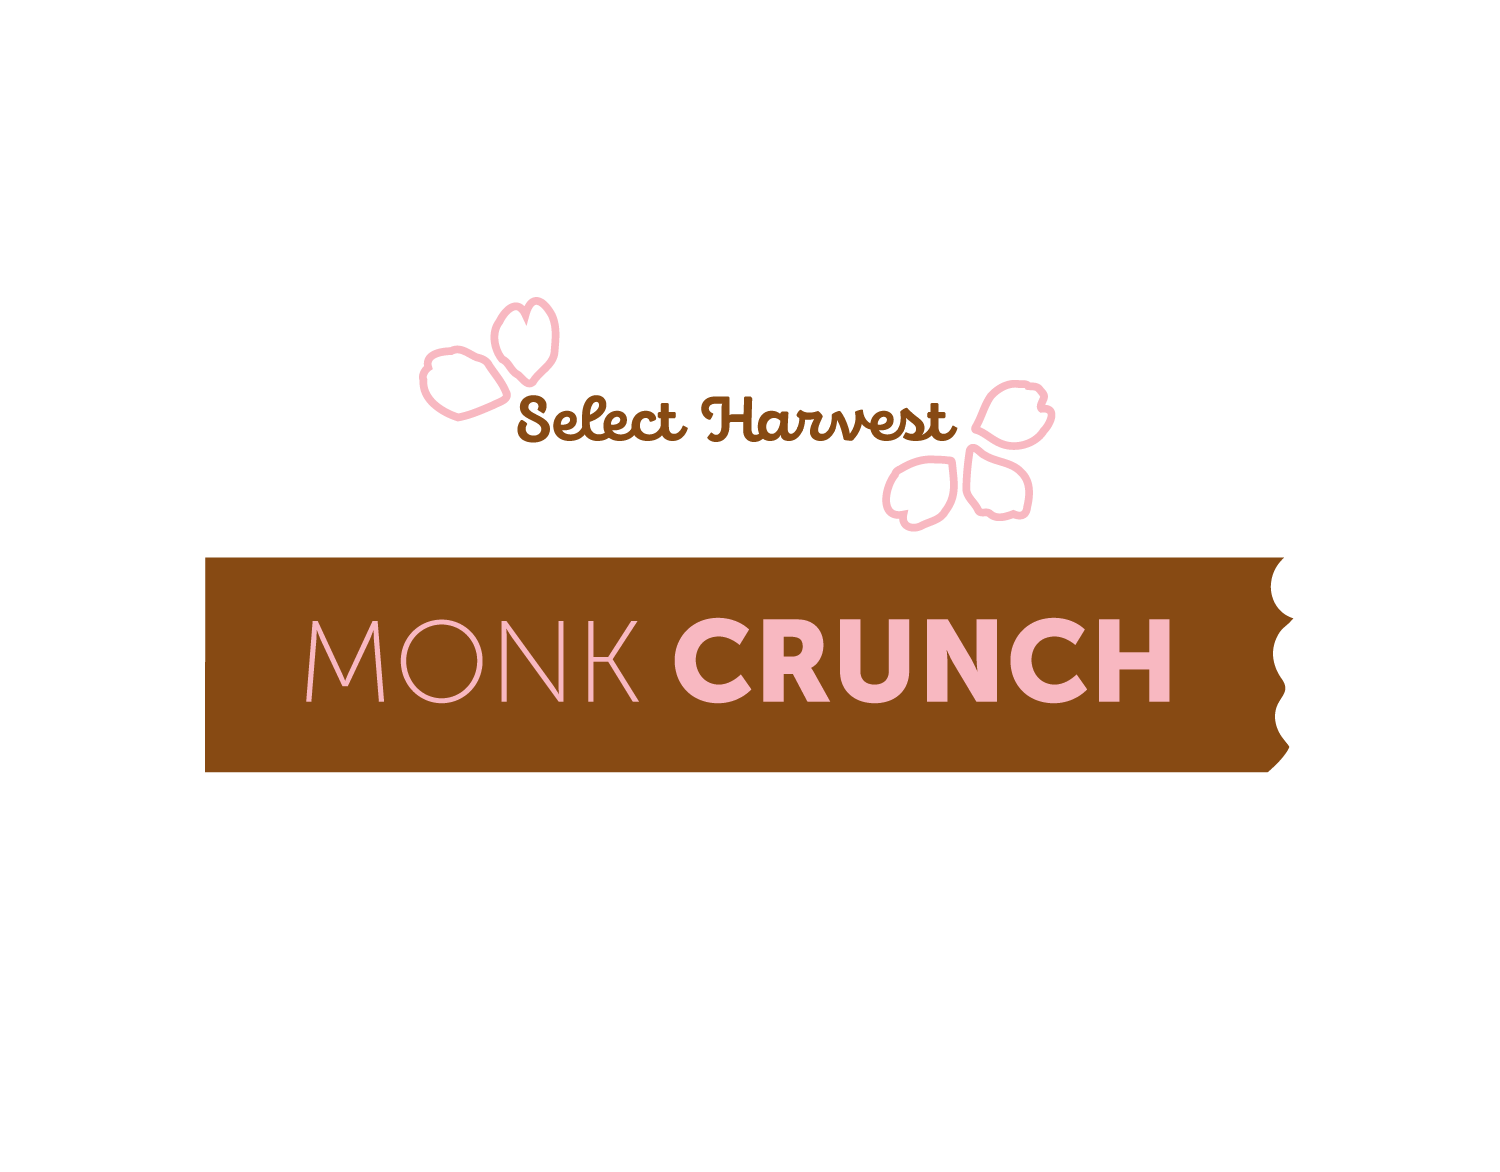 This logo contains the words Select Harvest Monk Crunch. Select Harvest
				has two almond flower petals on its top left side, and three almond flower 
				petals on the bottom right. Both petals are in an outline style and are pink
				in color. Select Harvest, on the other hand, is brown in color. The words
				Monk Crunch are contained in a brown rectangle box which has a small chunk of
				itself missing on the right side. The words Monk Crunch are pink in color, 
				with Monk using a much thinner font compared to Crunch.